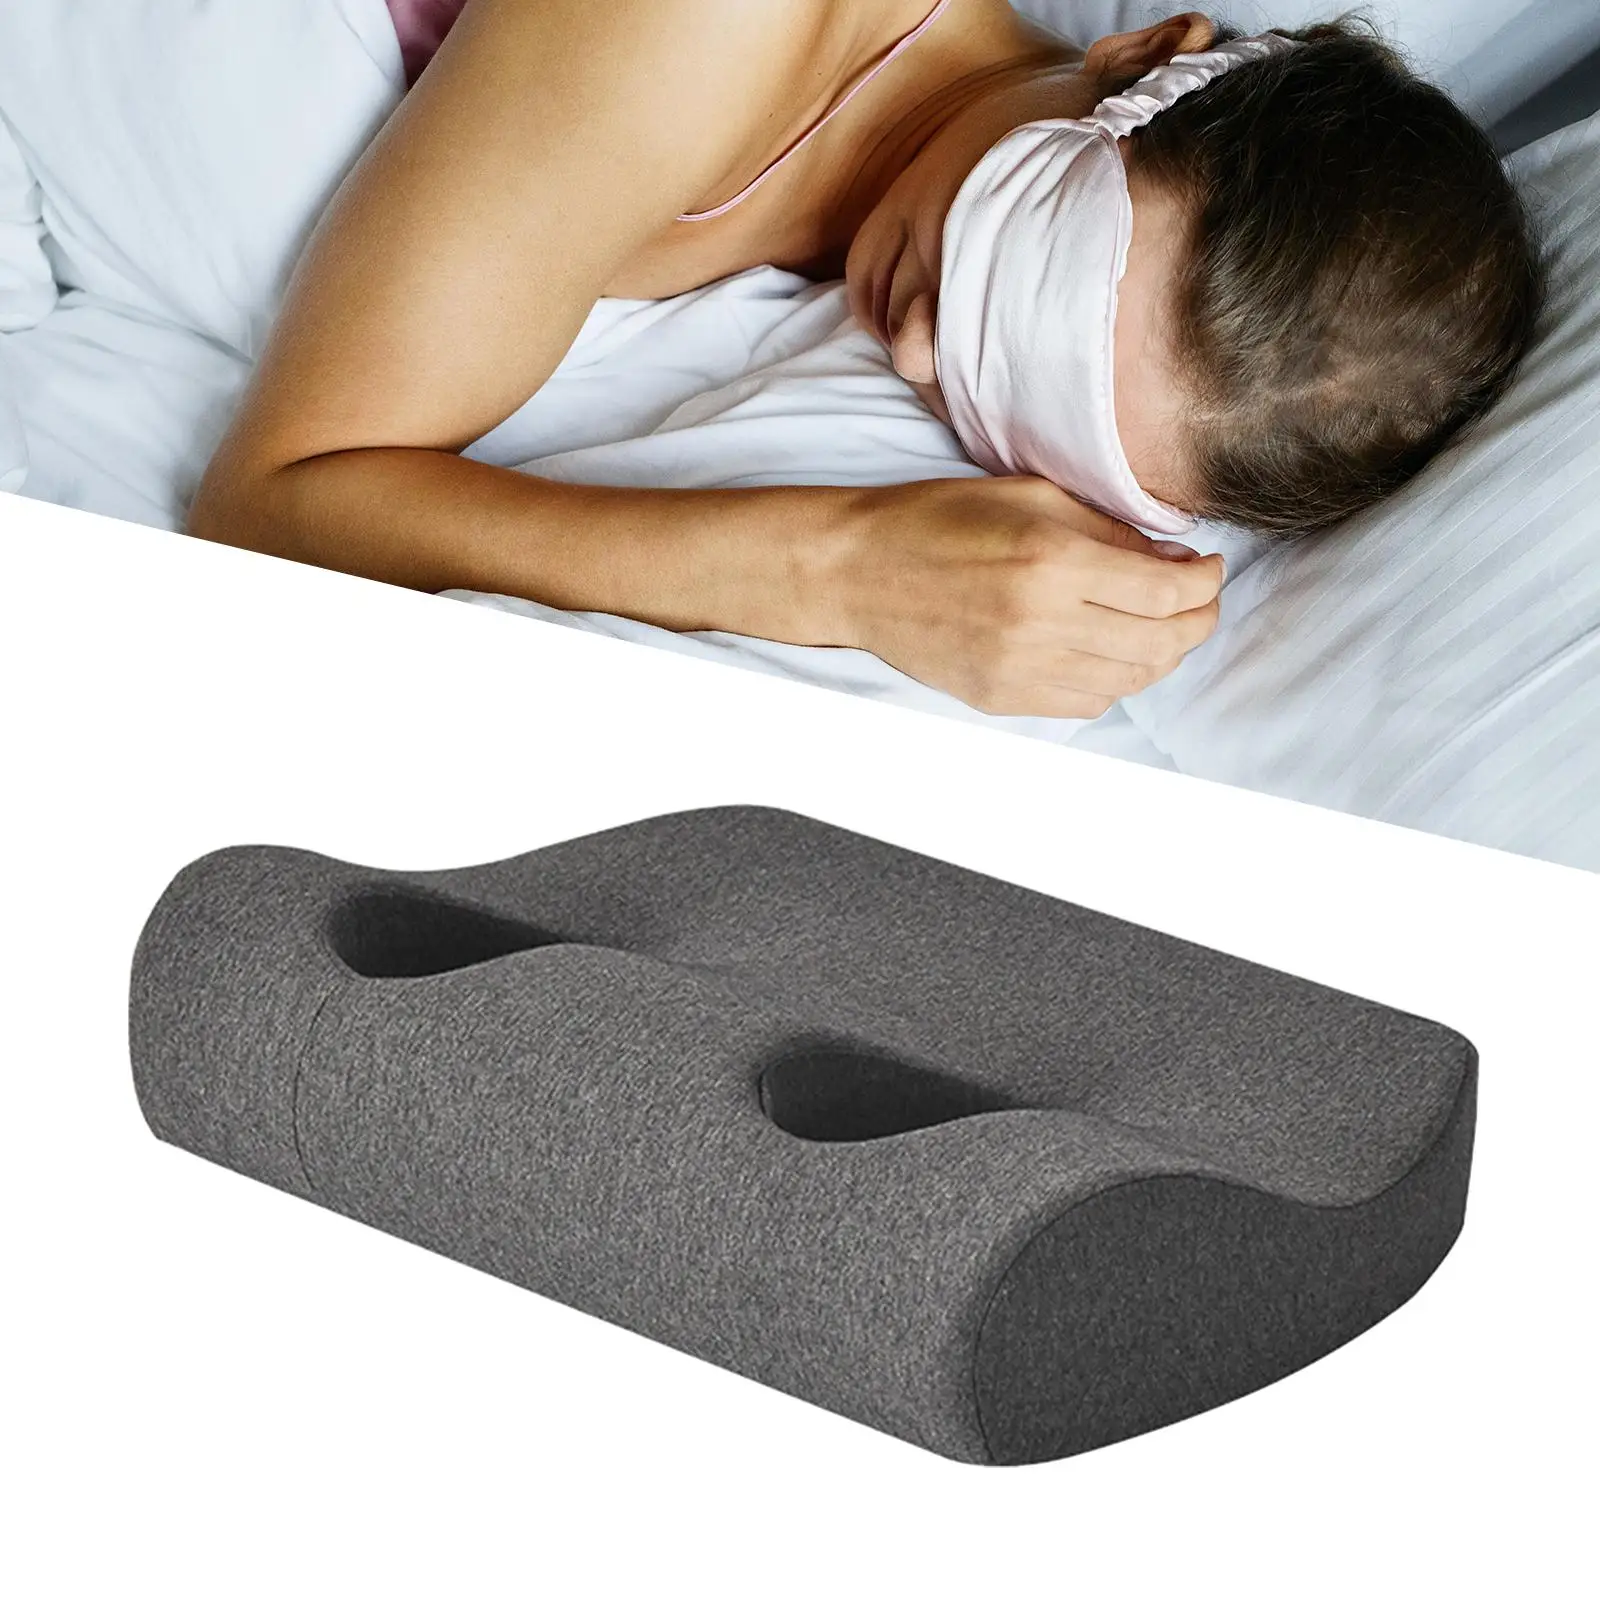 Pillow with Ear Hole Side Sleeping Pillow for Earbuds Headphones Ear Pain